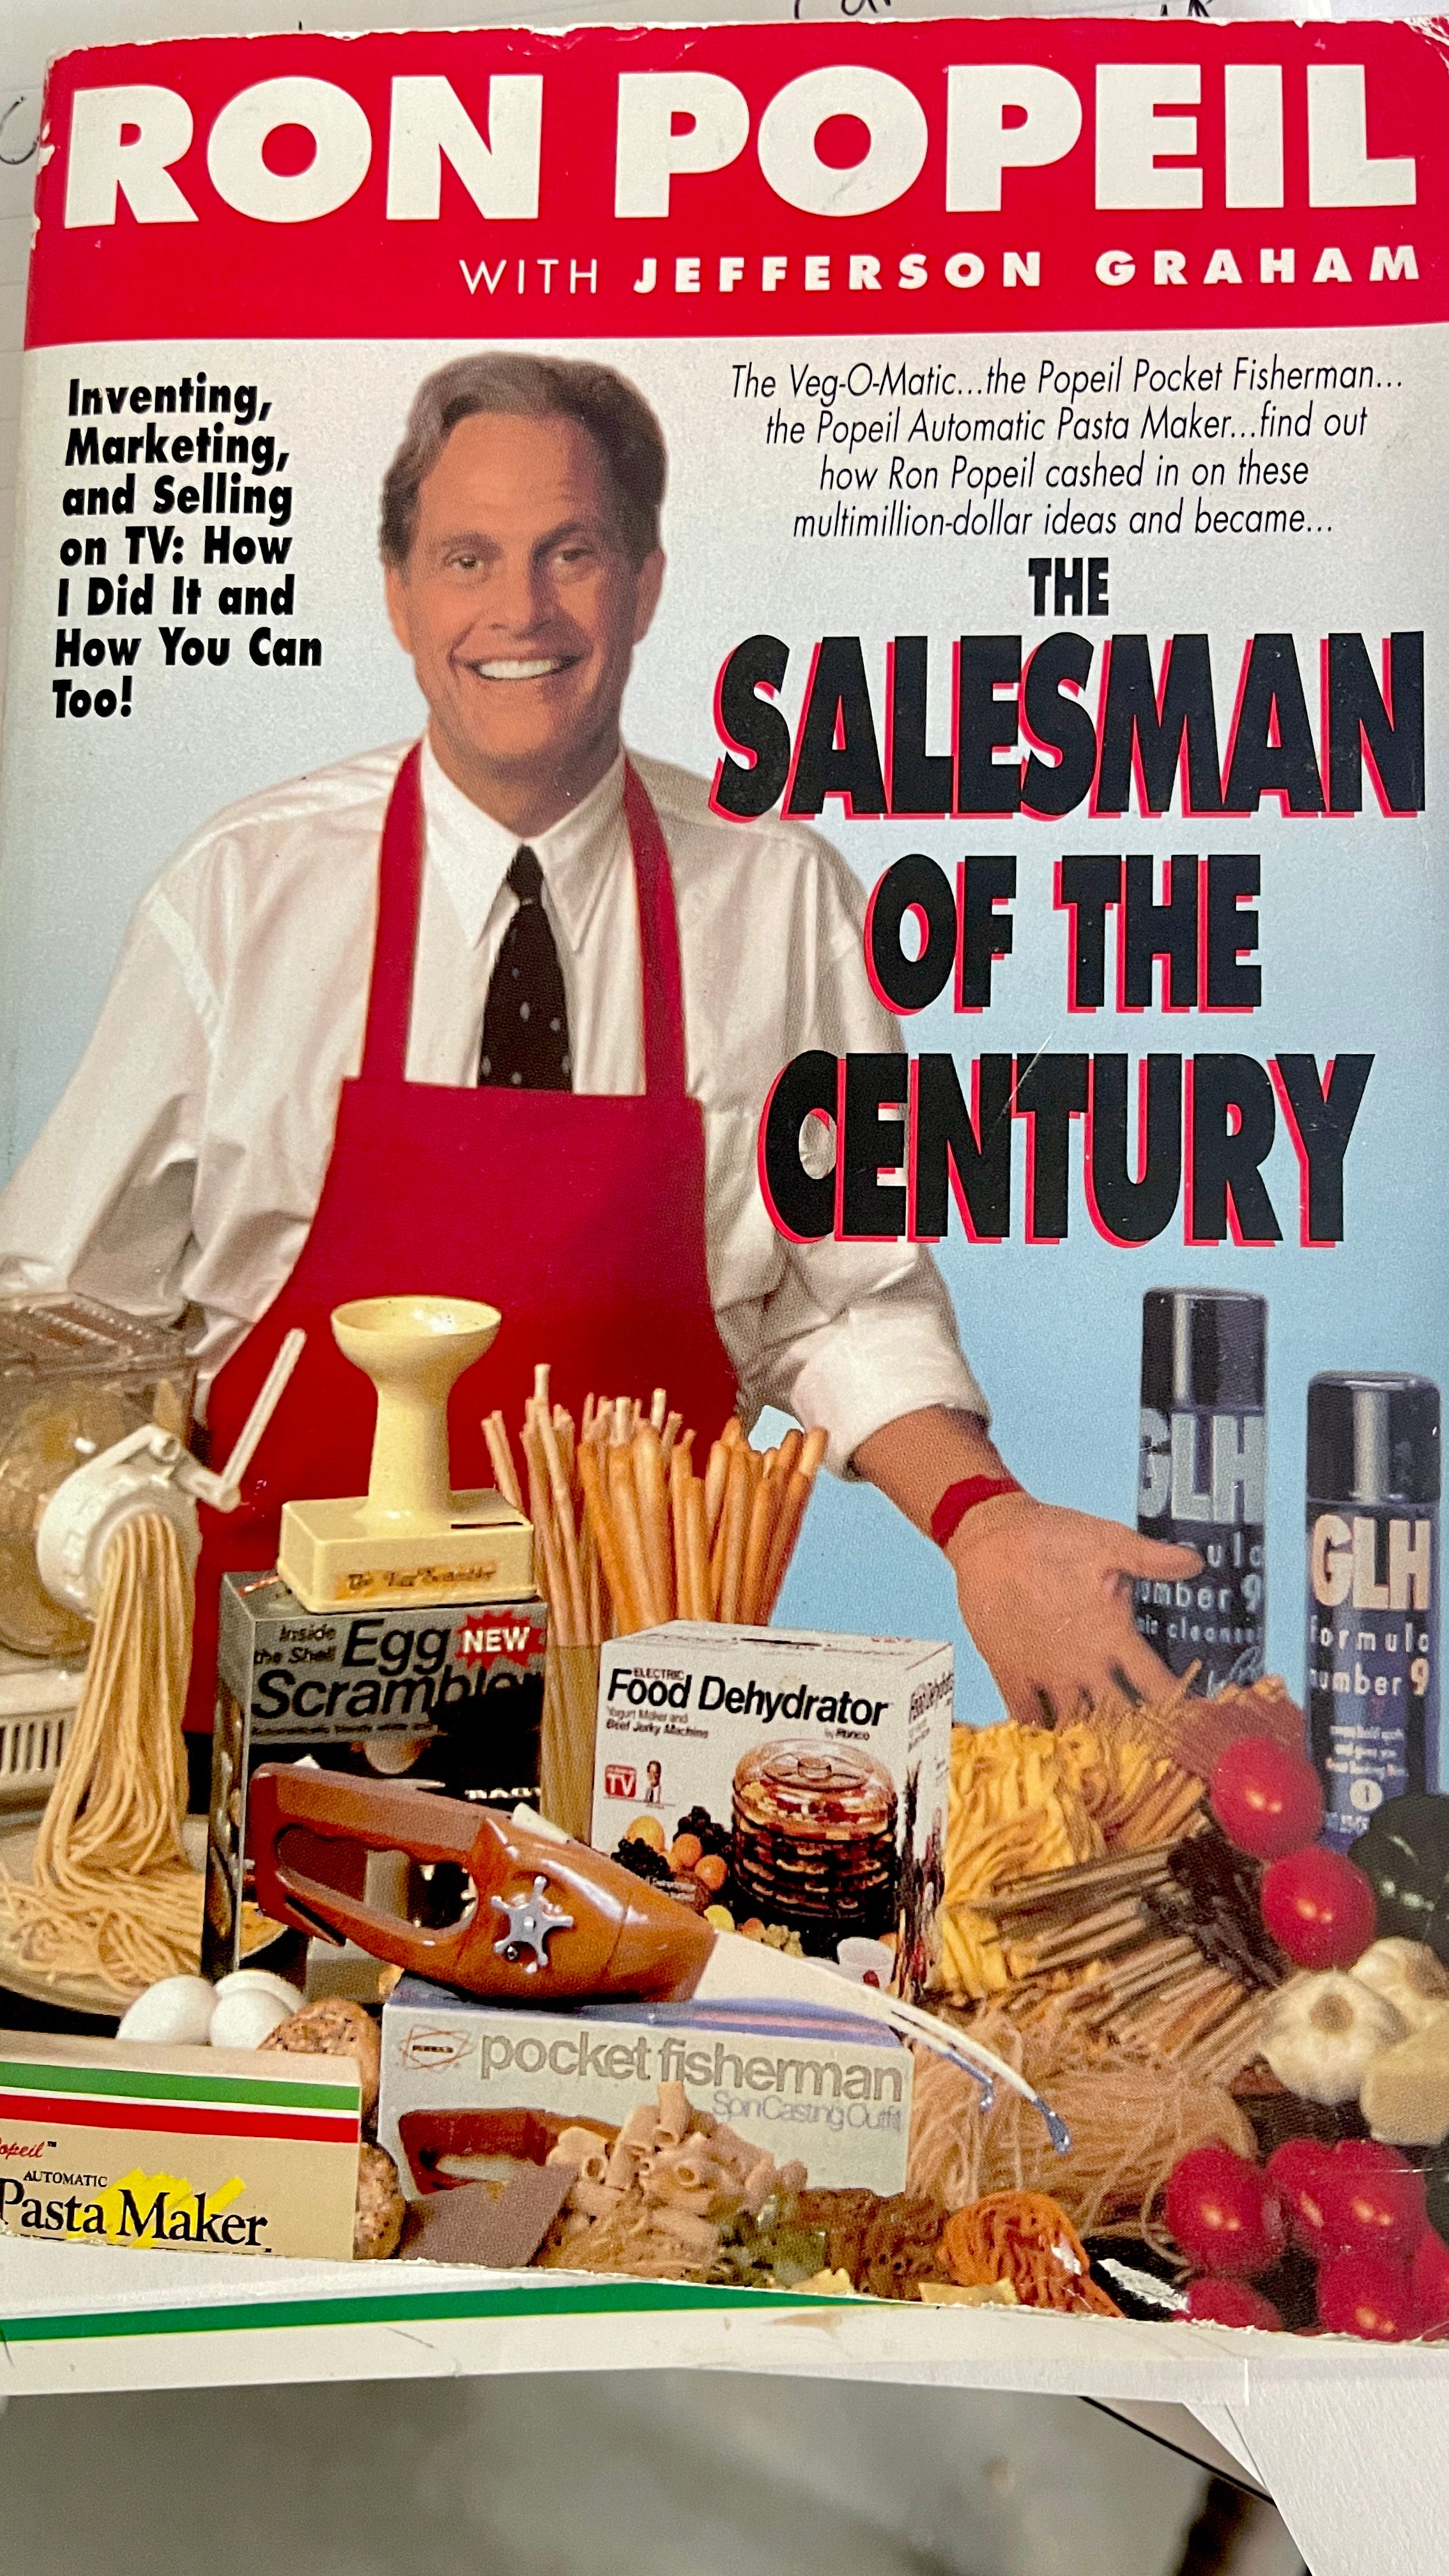 But wait, there's more! Remembering Ron Popeil